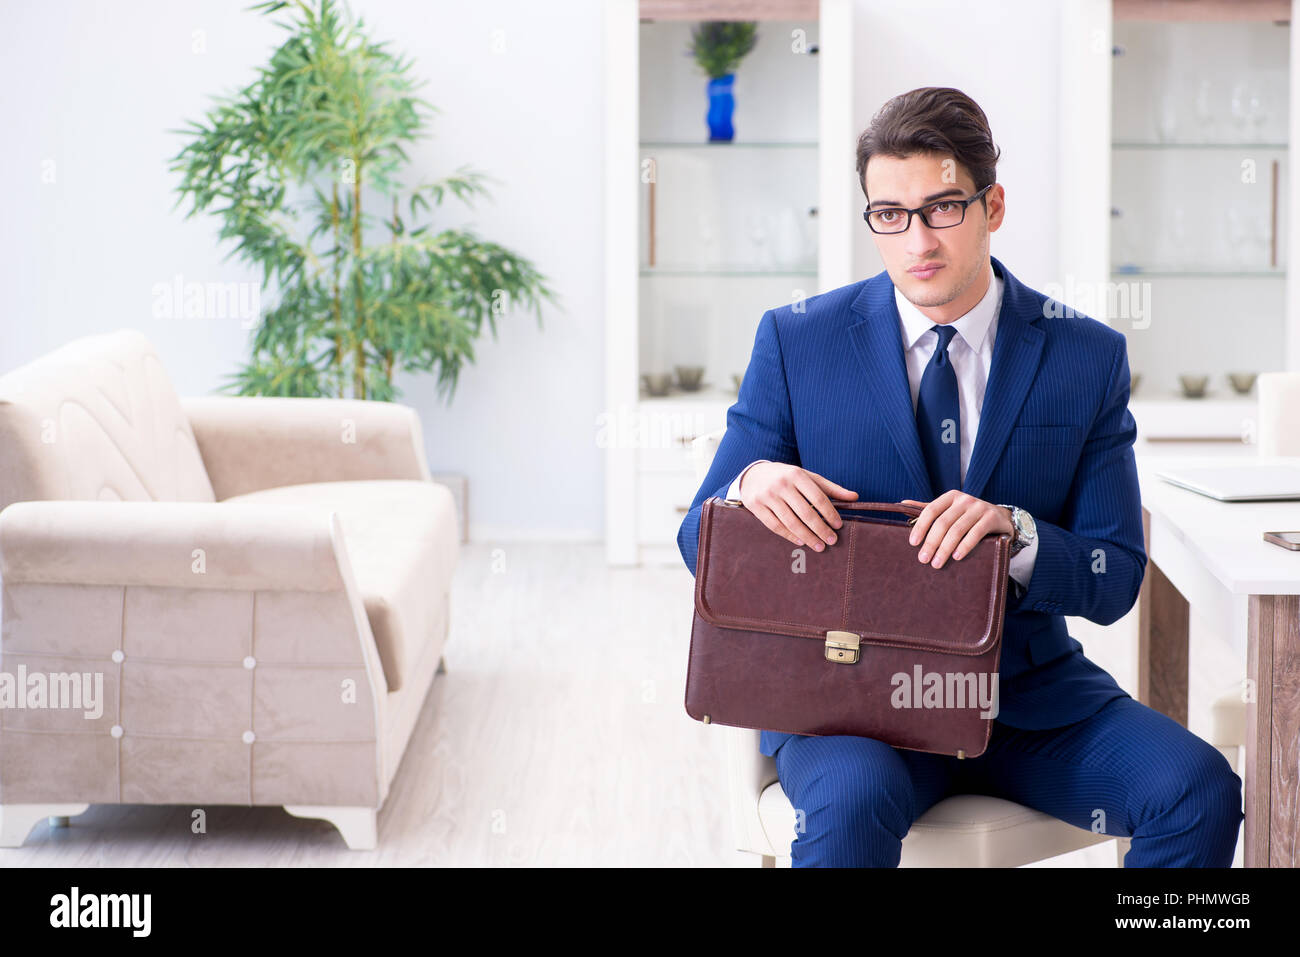 Bankrupt businessman angry and upset at home Stock Photo